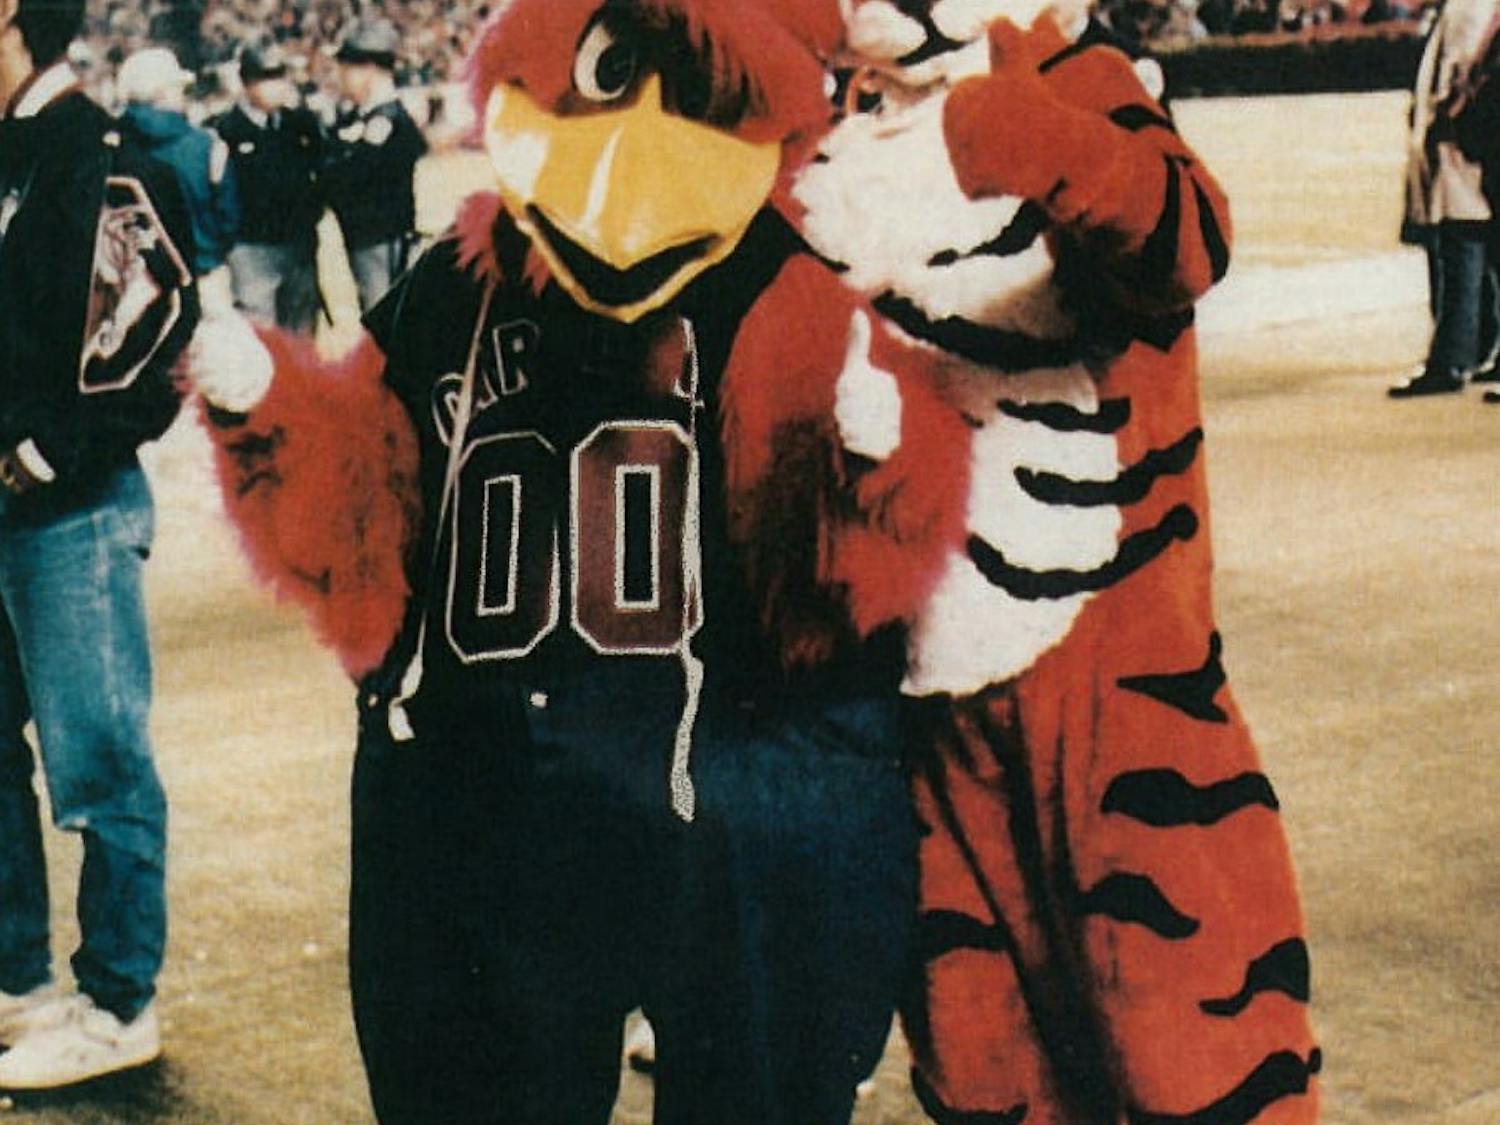 The mascots of South Carolina and Clemson keep fans fired up for the game. Whether it’s 1990 or present day, one thing has always been the same: the Clemson-Carolina rivalry is between players and mascots alike.